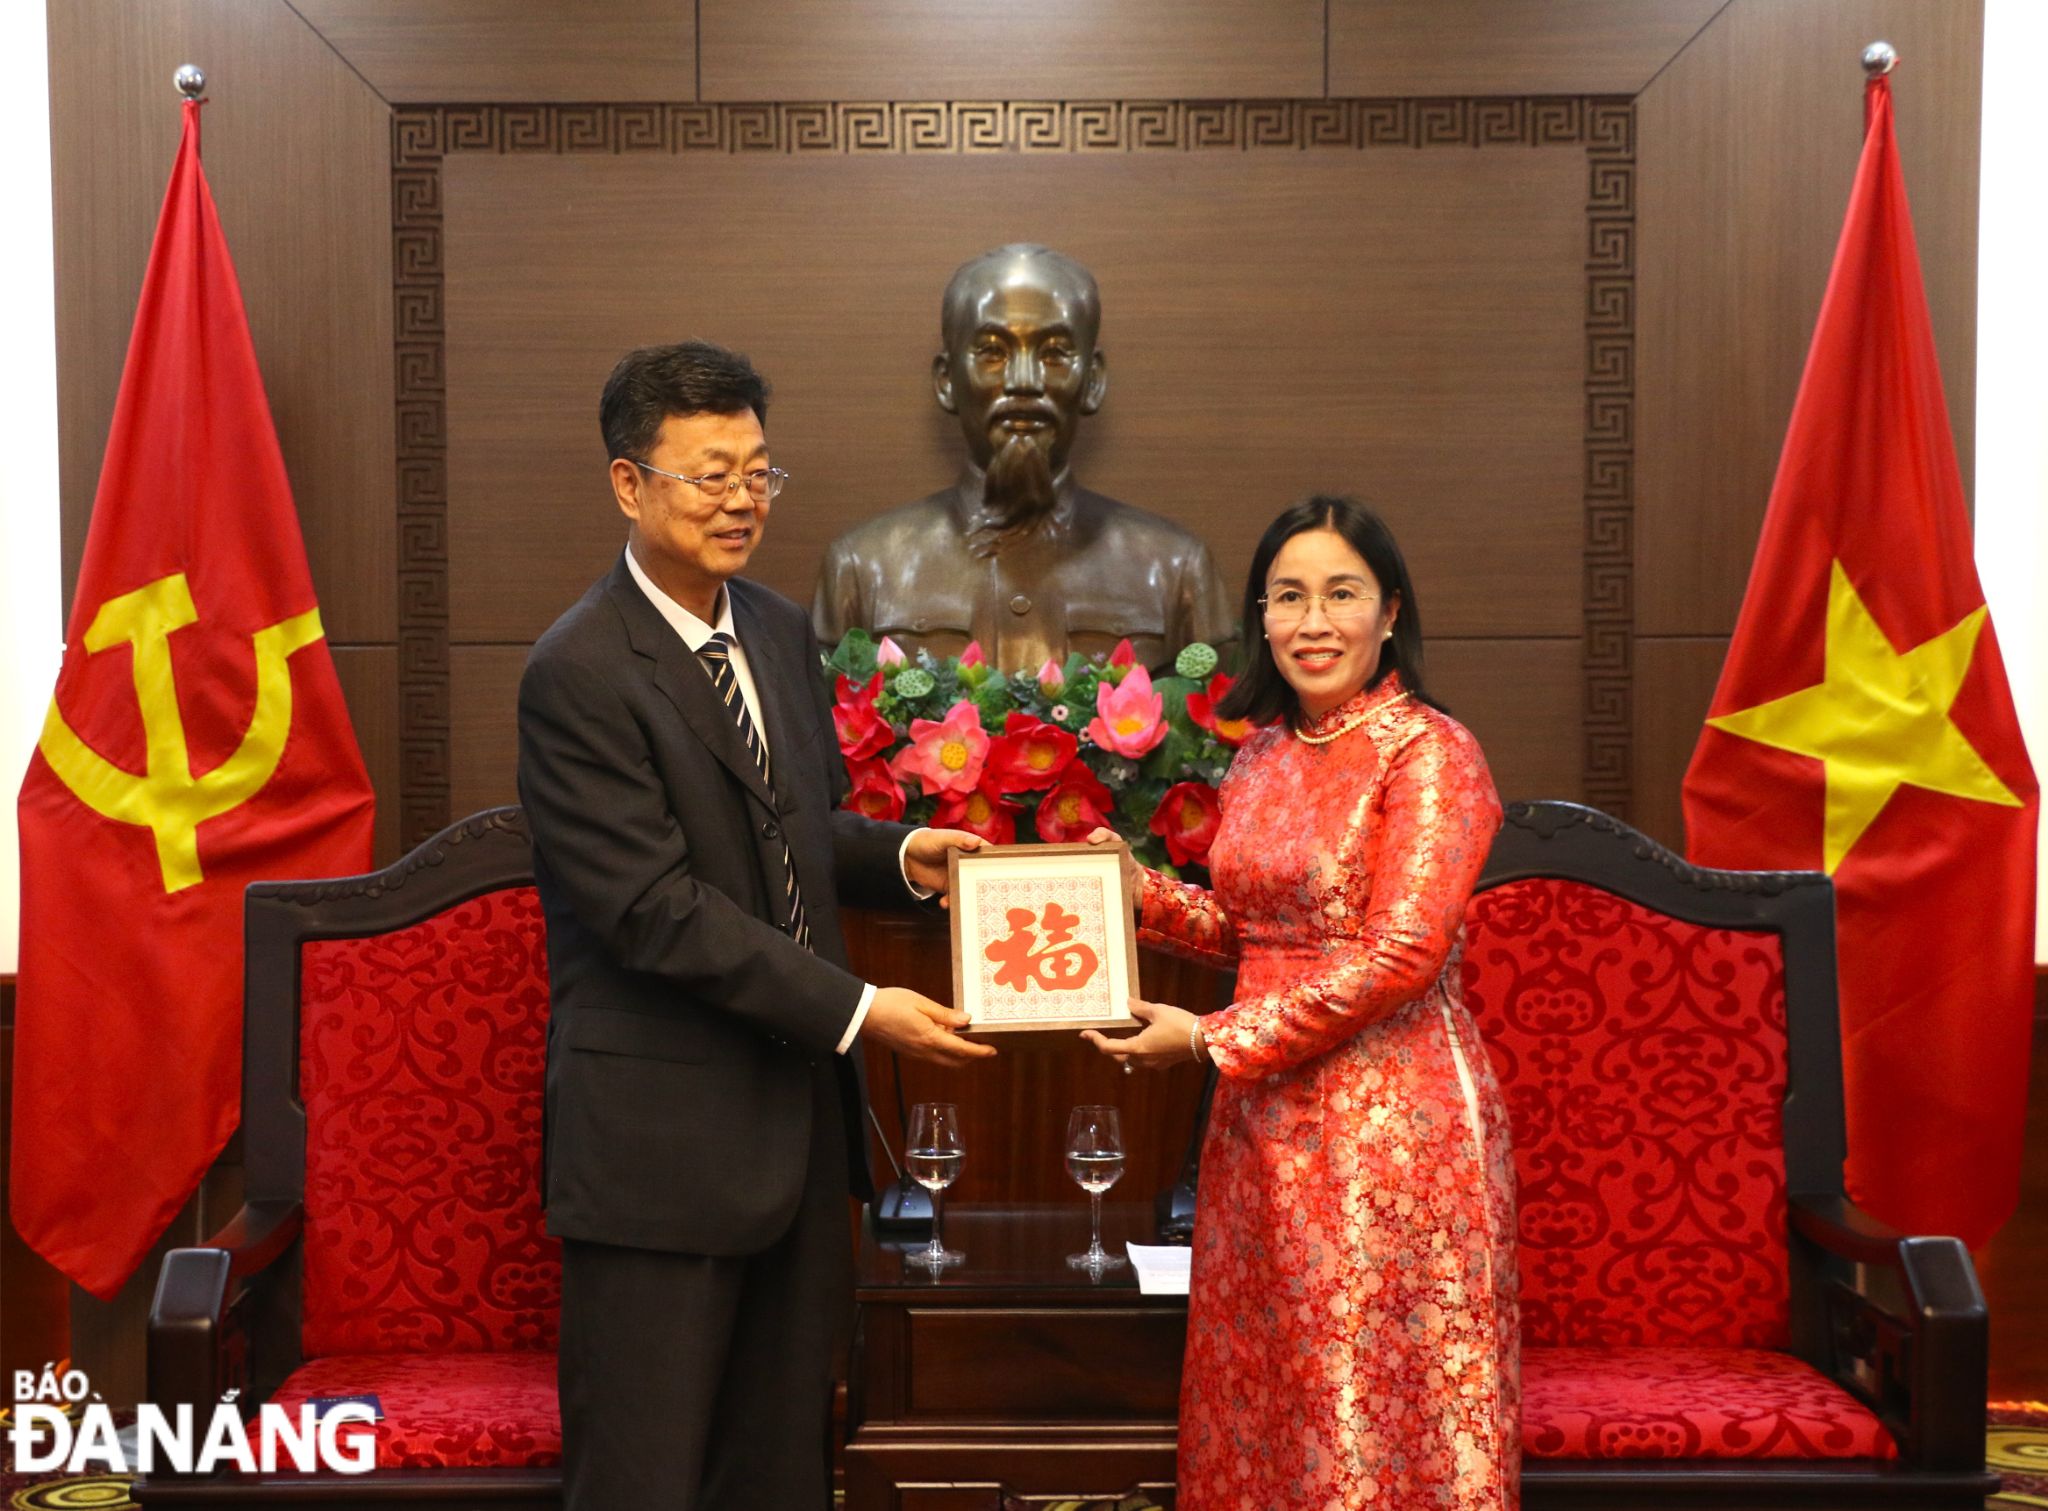 Head of the Social Development Committee of the People's Council of China’s Liaoning Province (left) and Da Nang People’s Council Vice Chairwoman Nguyen Thi Anh Thi